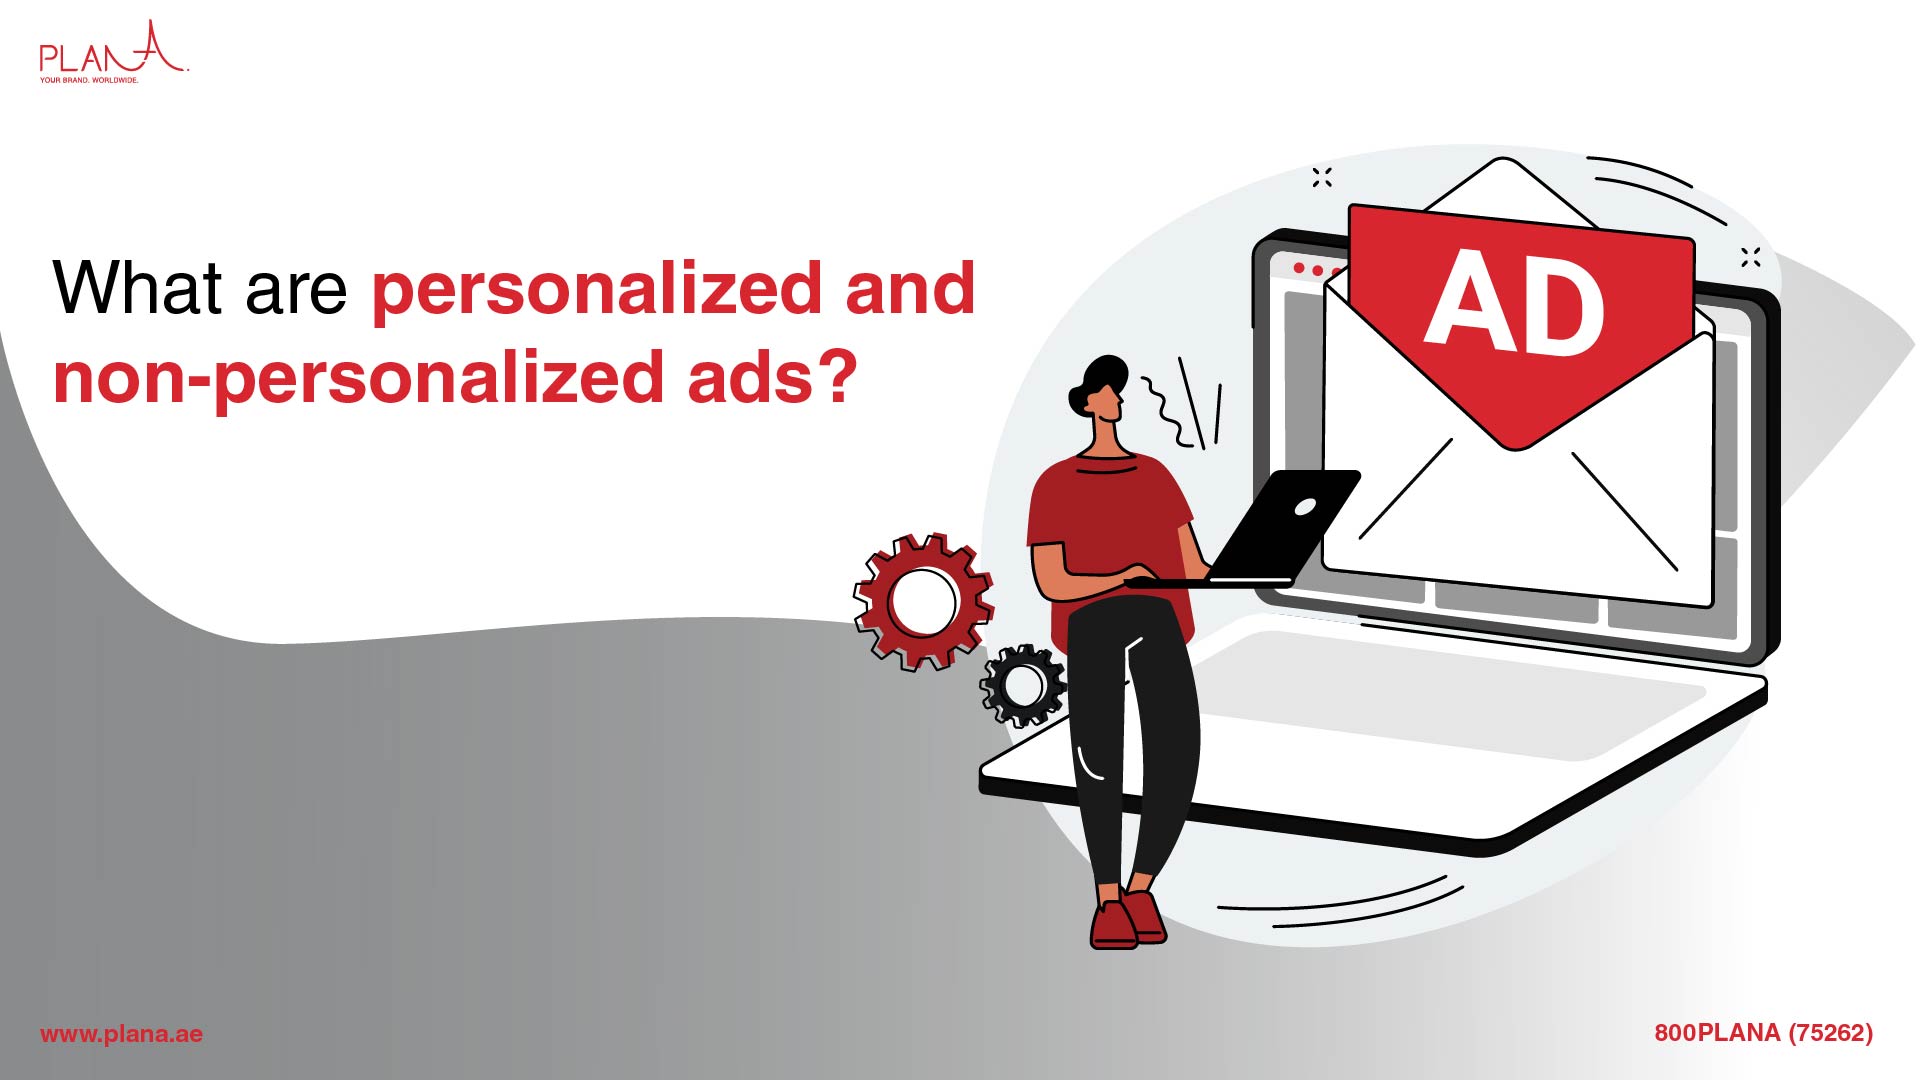 What are personalized and non-personalized ads?